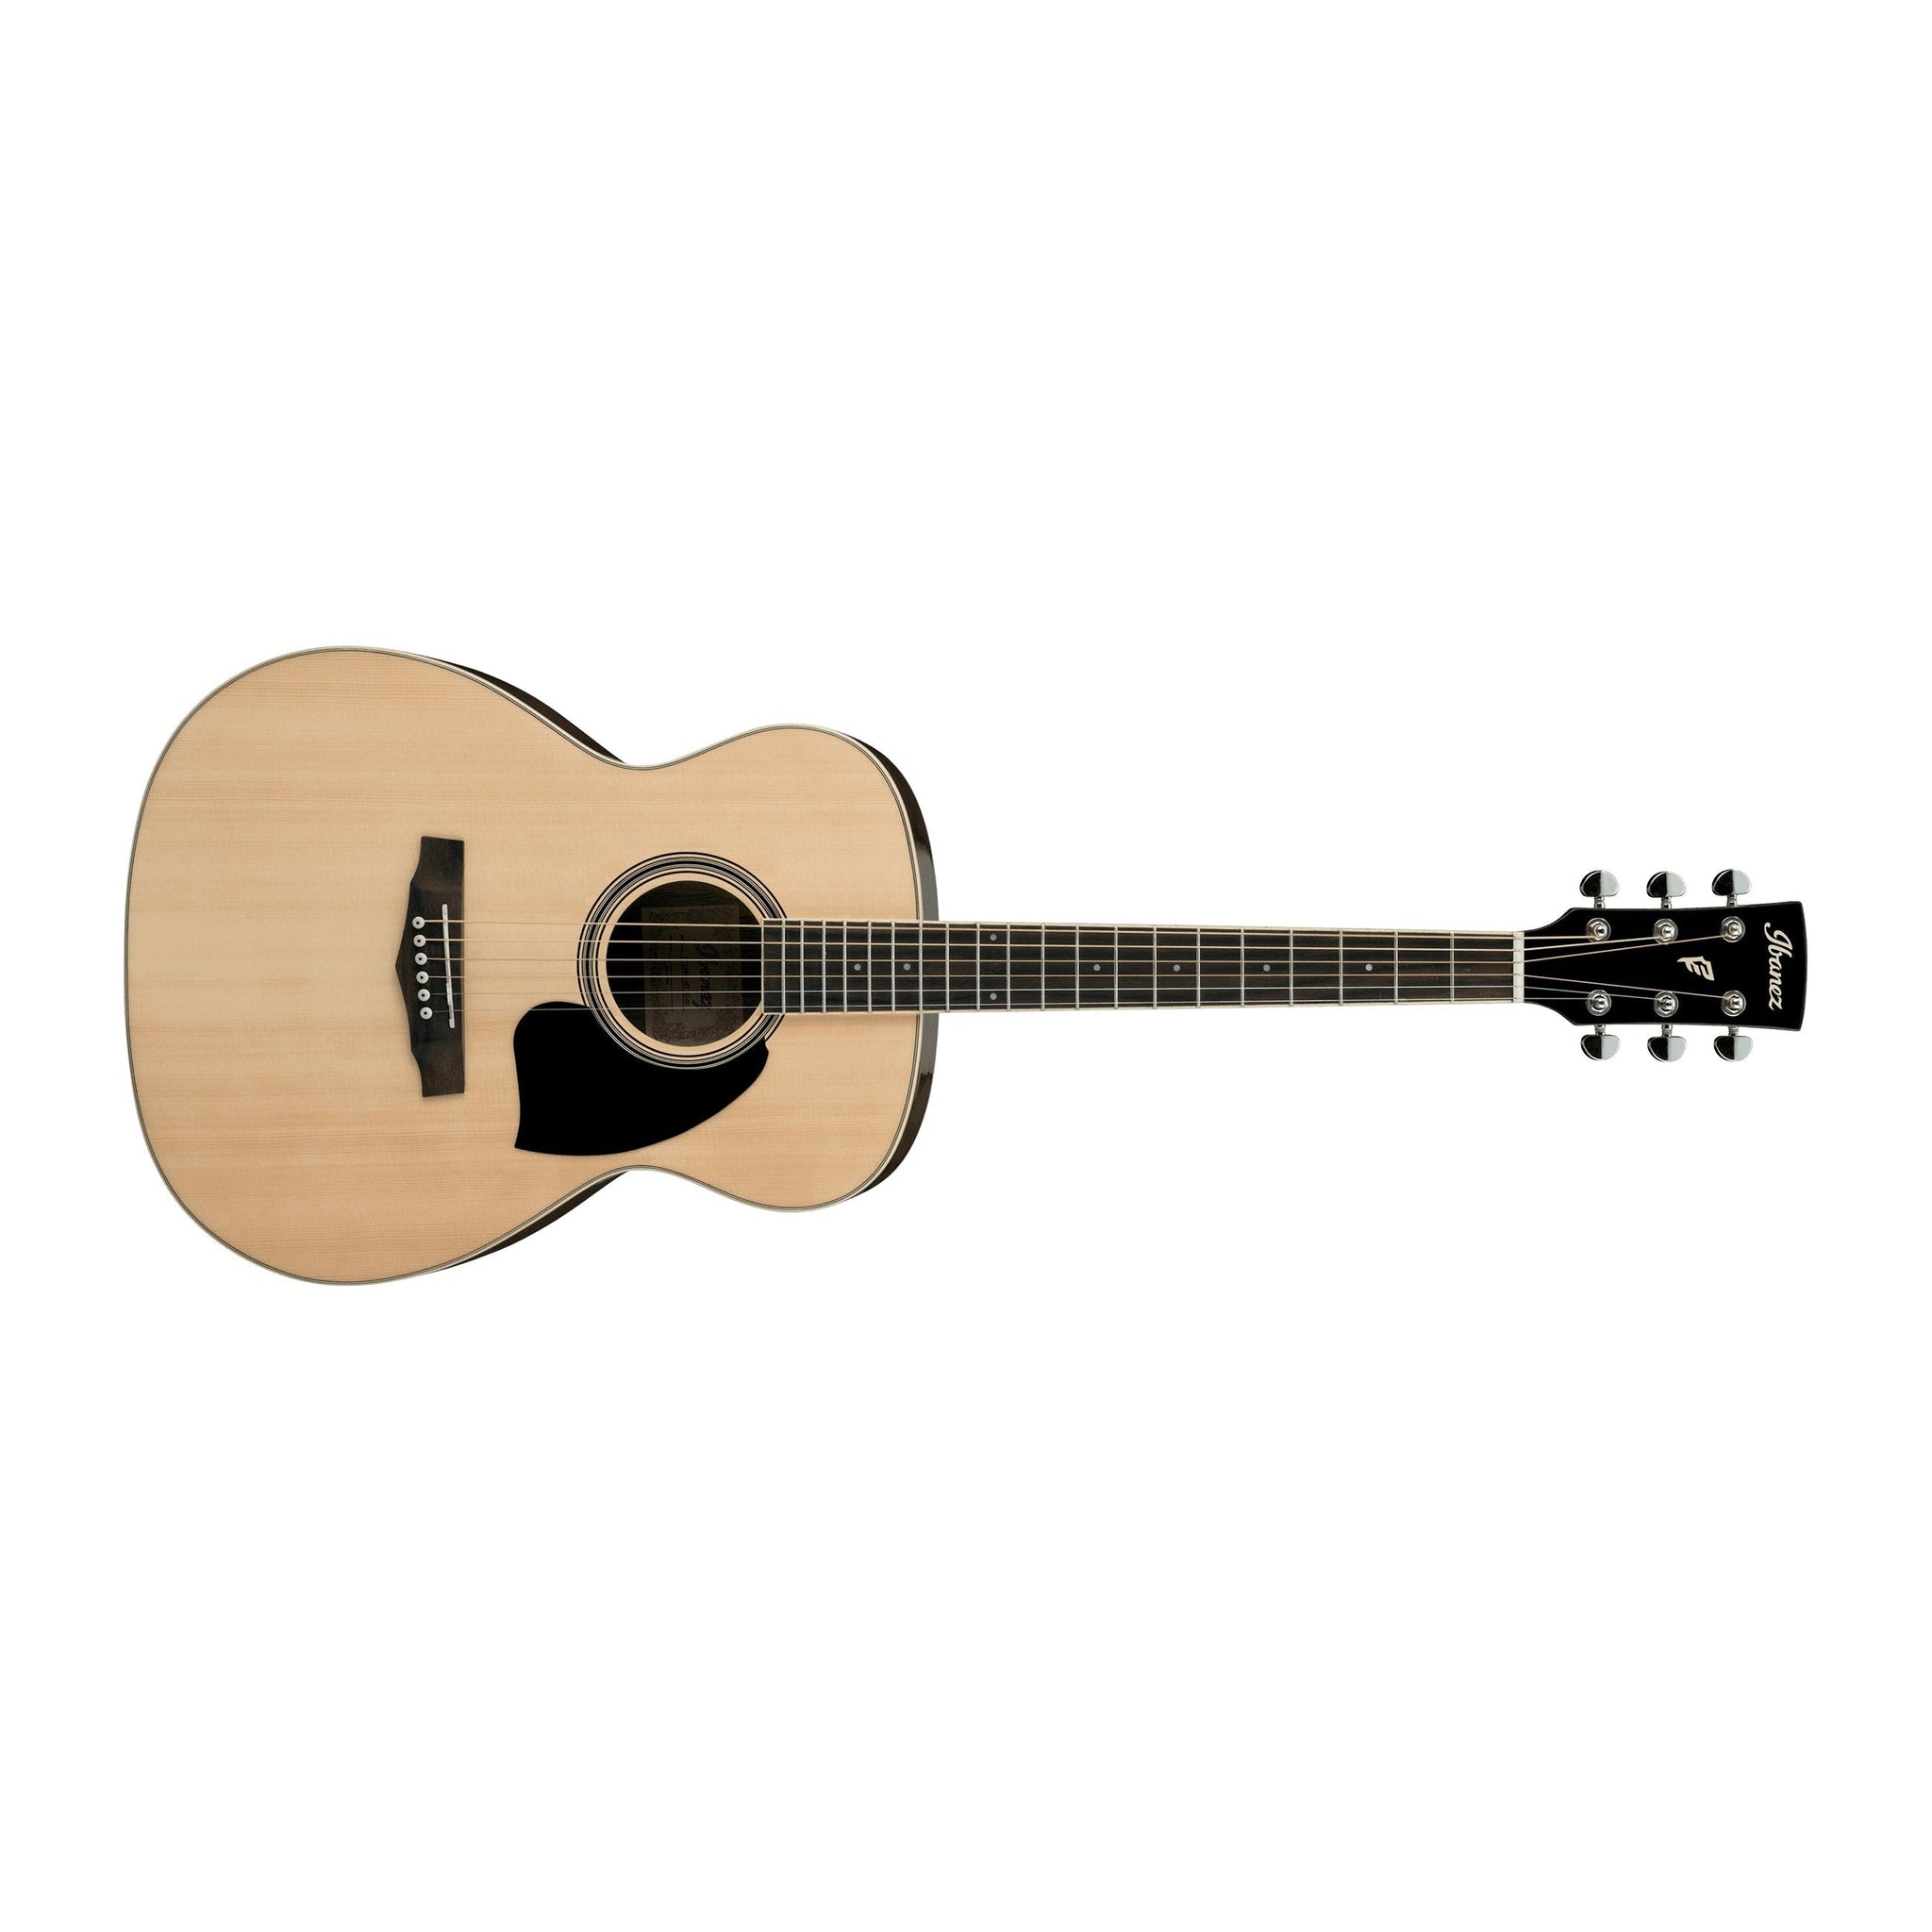 Ibanez PC15-NT Performance Grand Concert Acoustic Guitar-Natural High Gloss-Music World Academy